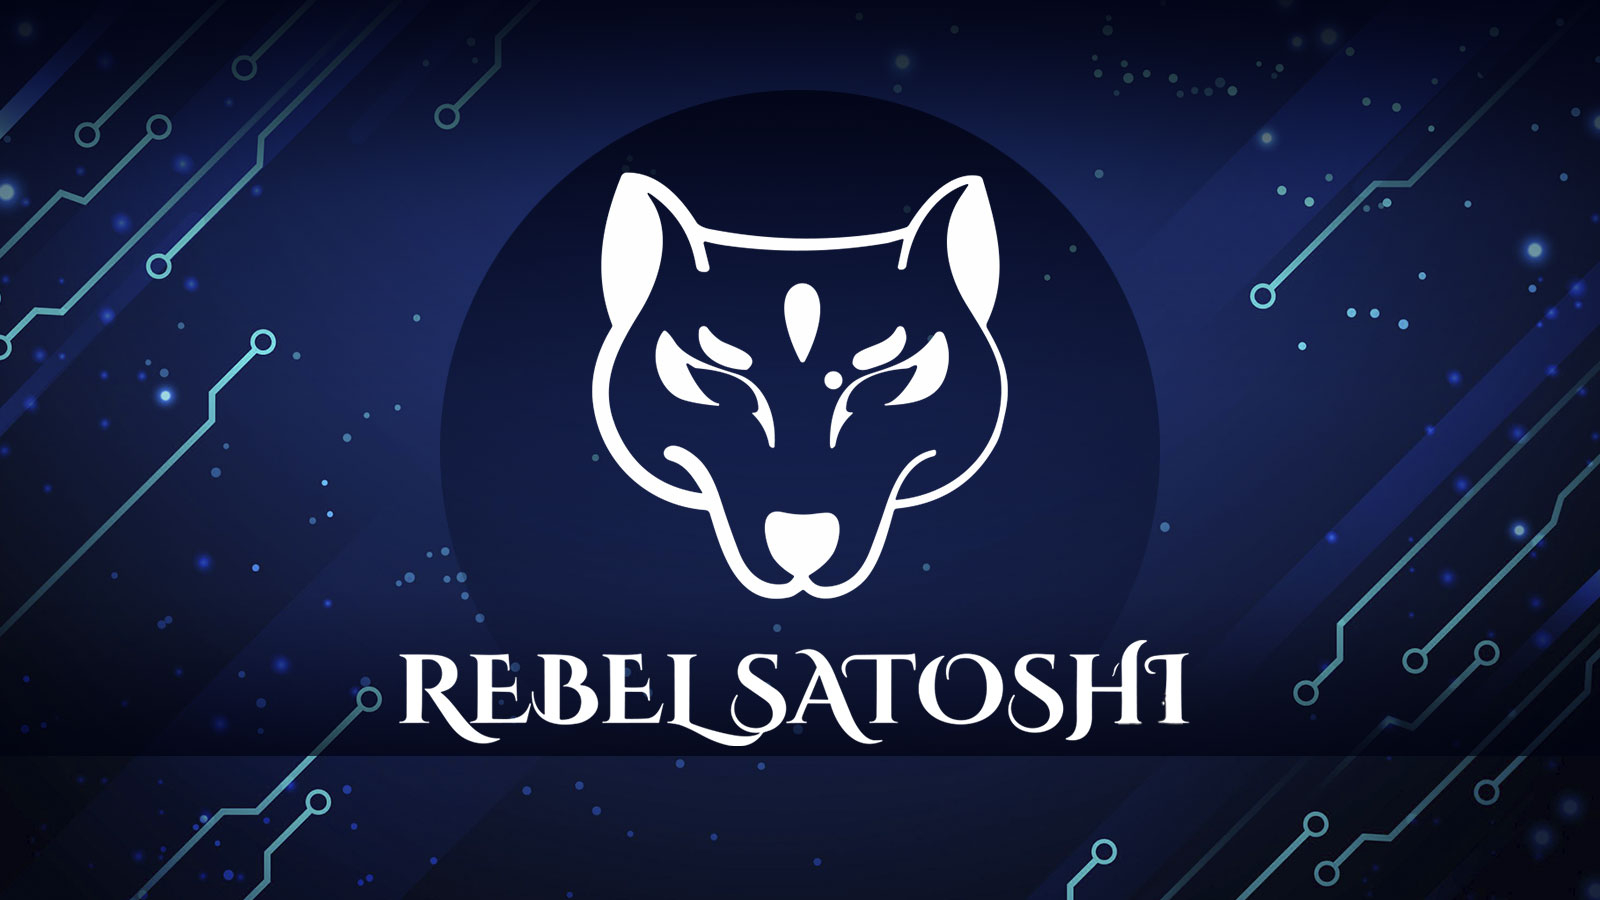 Rebel Satoshi (RBLZ) Pre-Sale Getting Ready to On-Board New Investors while Community Welcomes Bitcoin ETF Approval